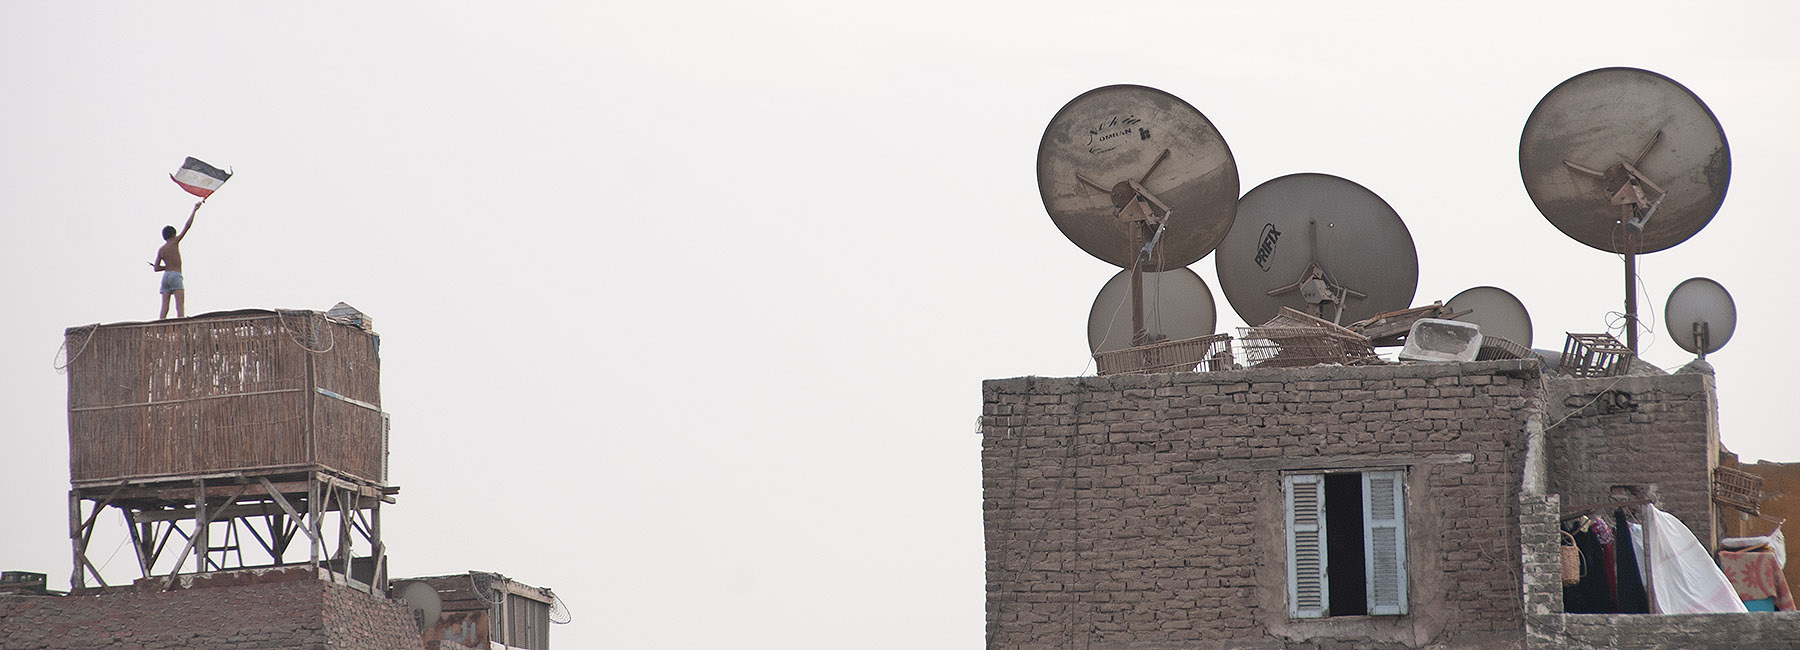 satellite dishes in north african cities, photographed by manuel alvarez diestro